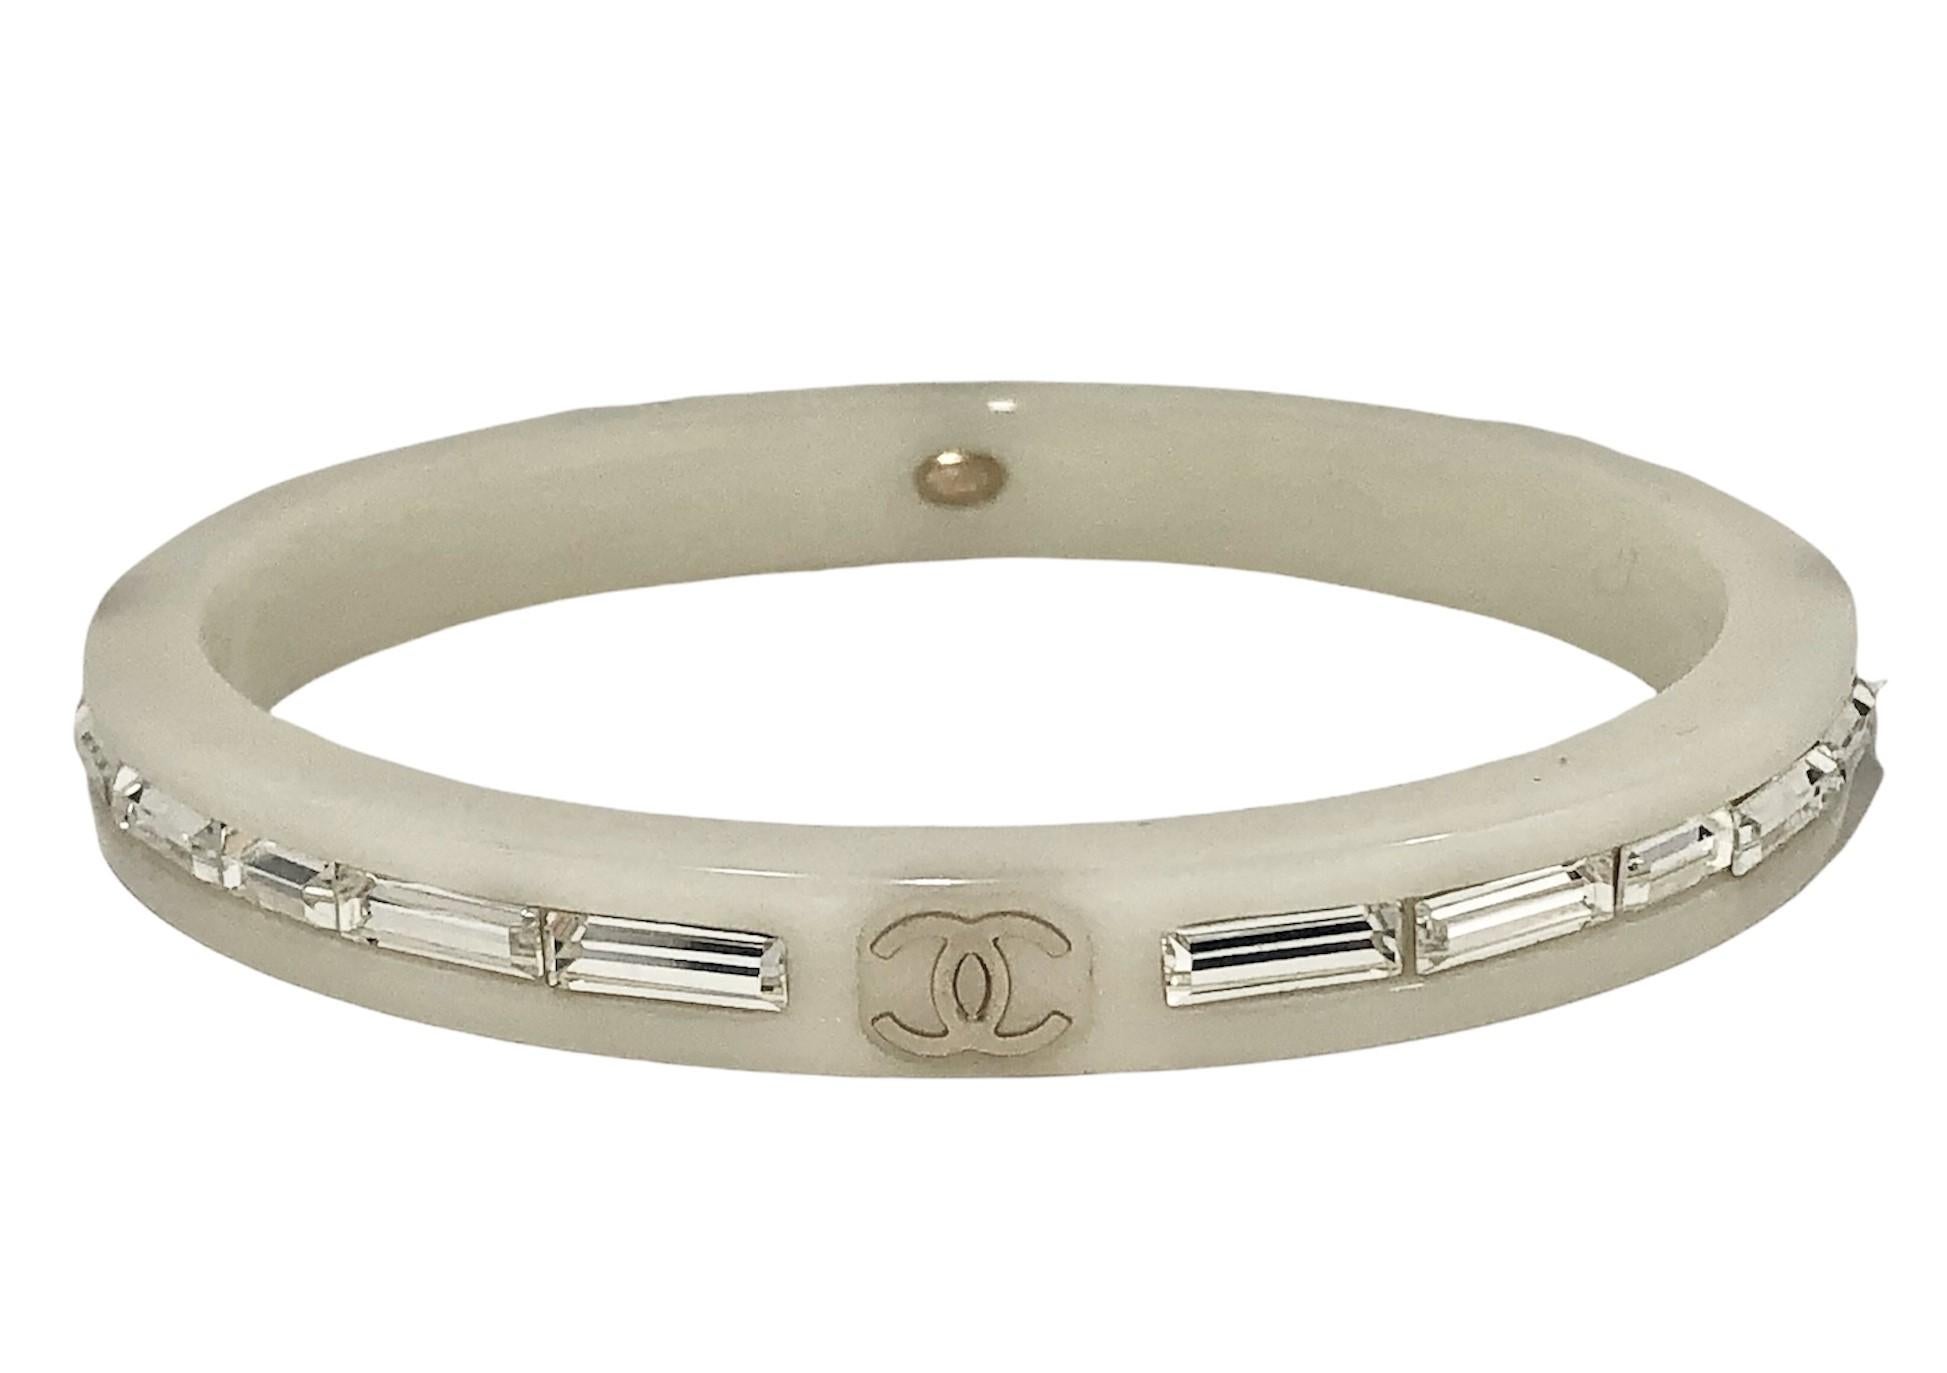 This stylish Chanel bangle bracelet is crafted in white resin embedded with baguette crystals all around. The continuous line is punctuated at four positions by the familiar  